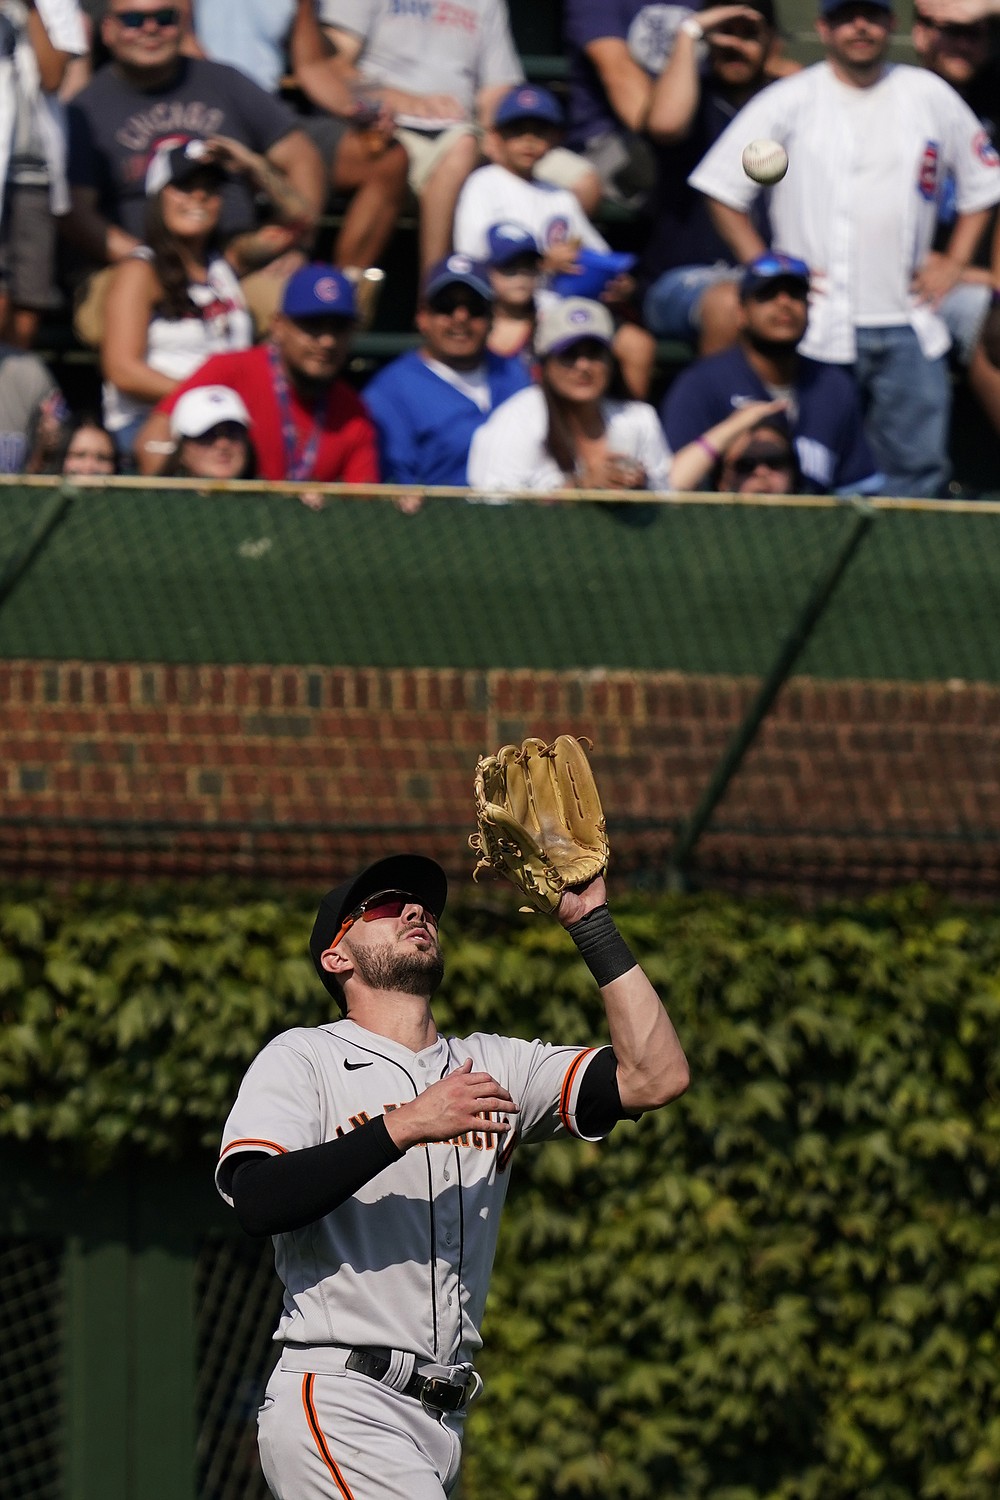 Kris Bryant returns to Wrigley Field, Giants beat Cubs 6-1 - The